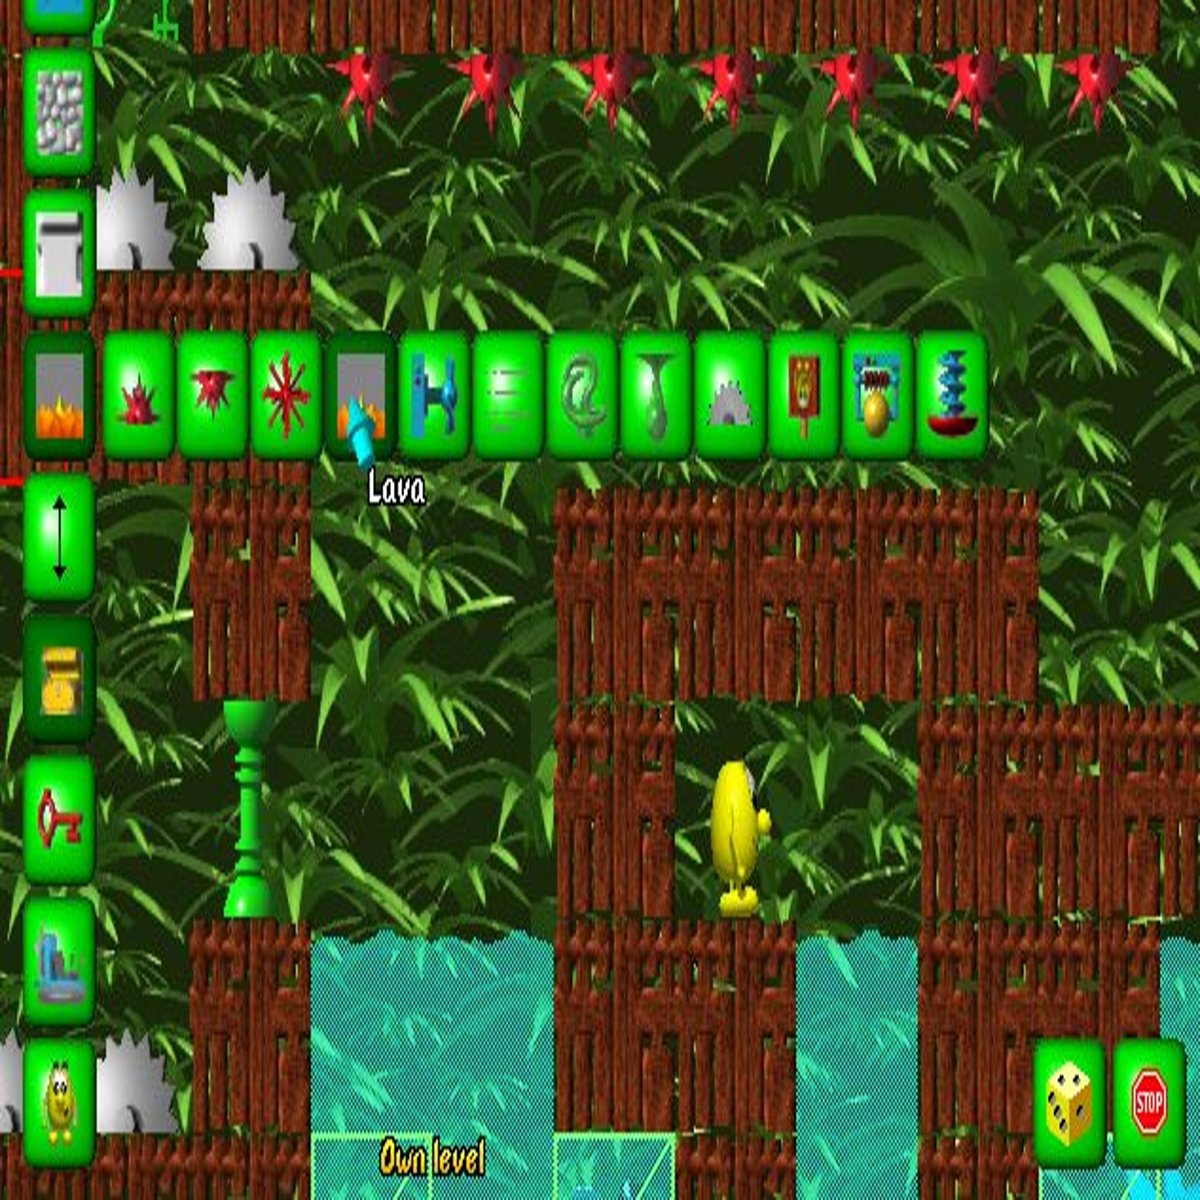 Speedy Eggbert's level editor made it the best game to ever score 4%